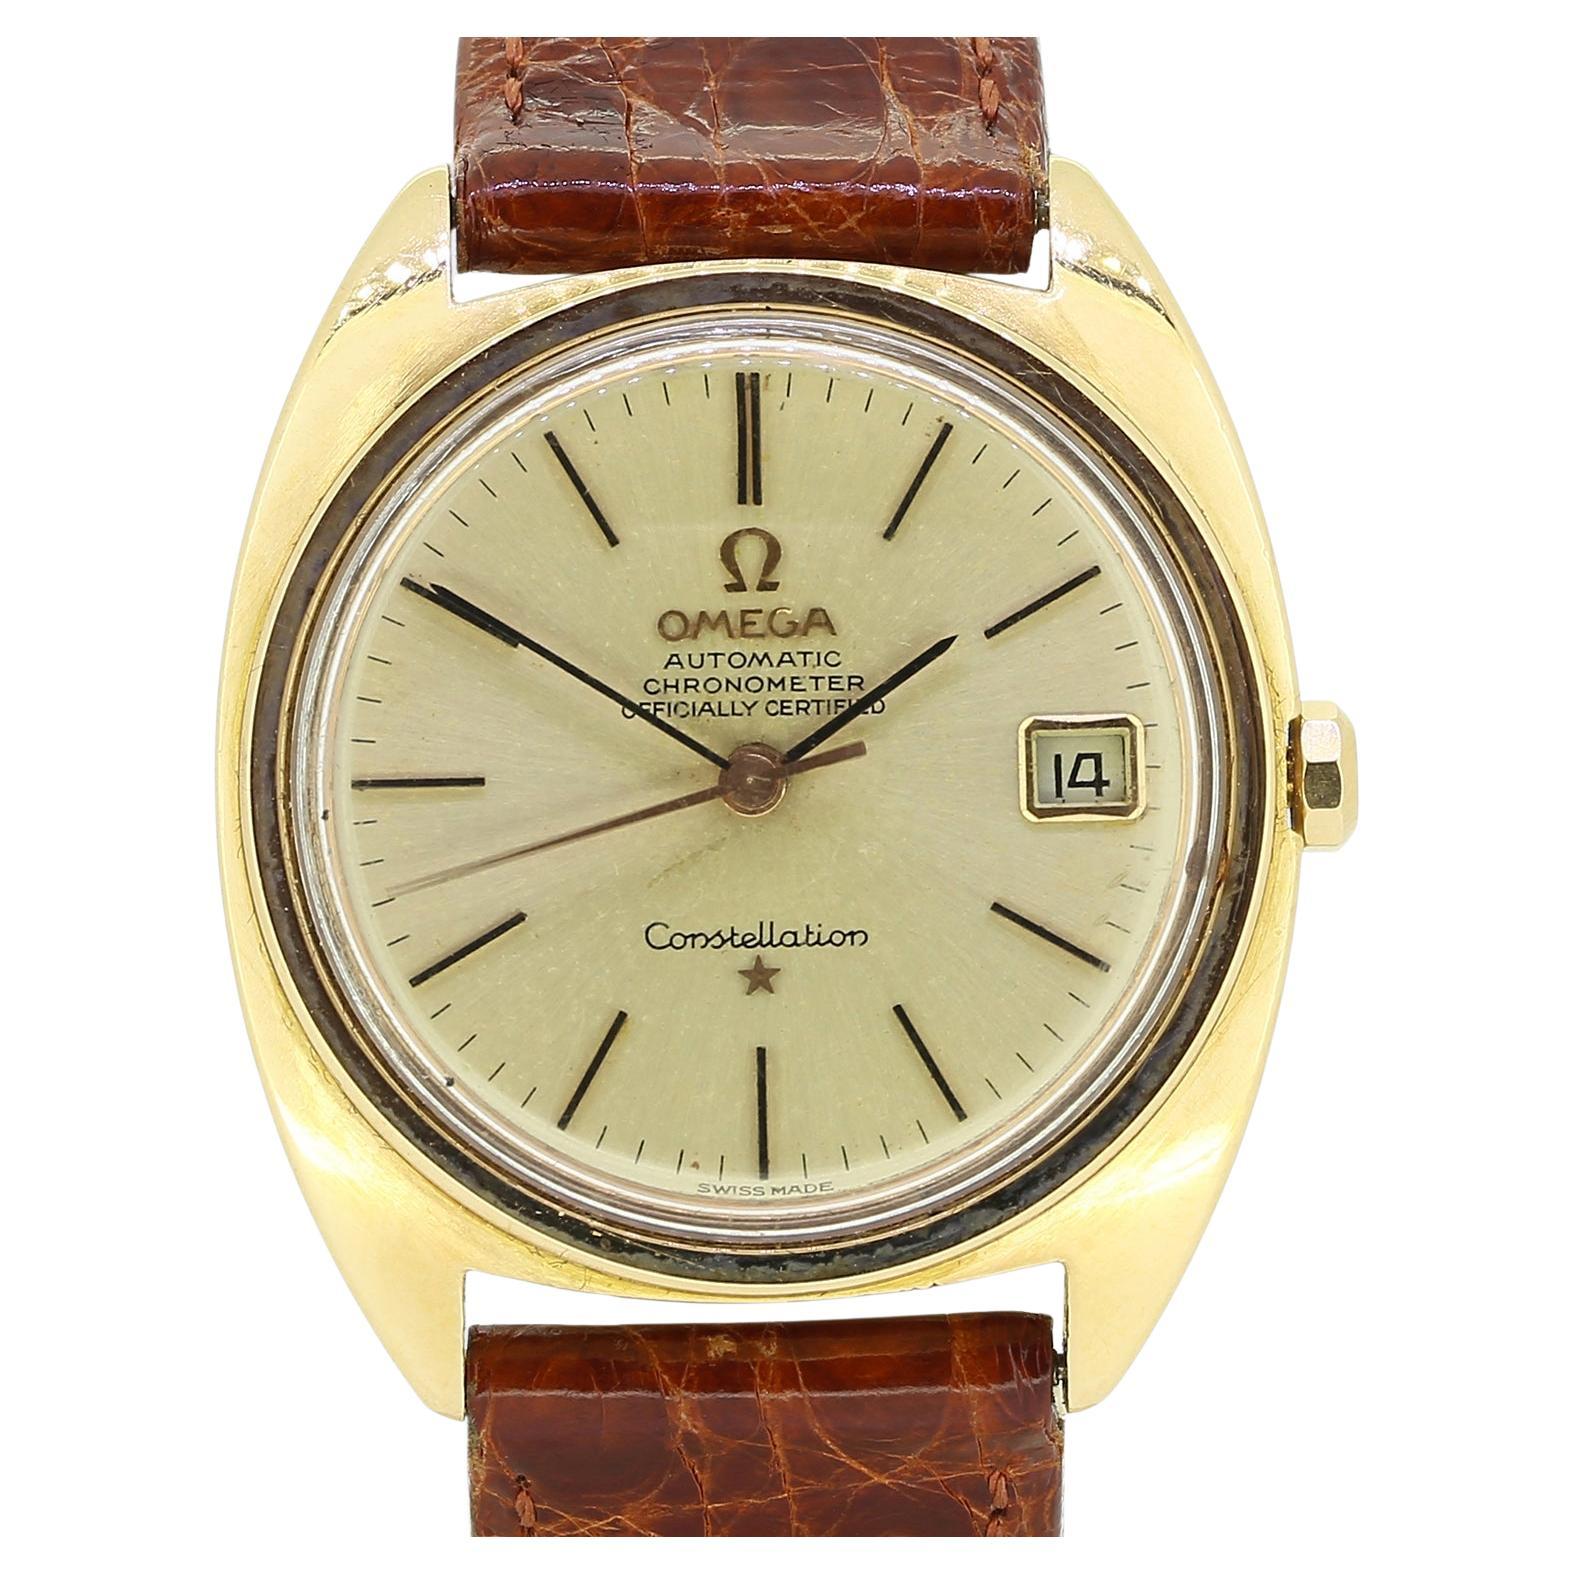 Vintage Omega Automatic Constellation Watch For Sale